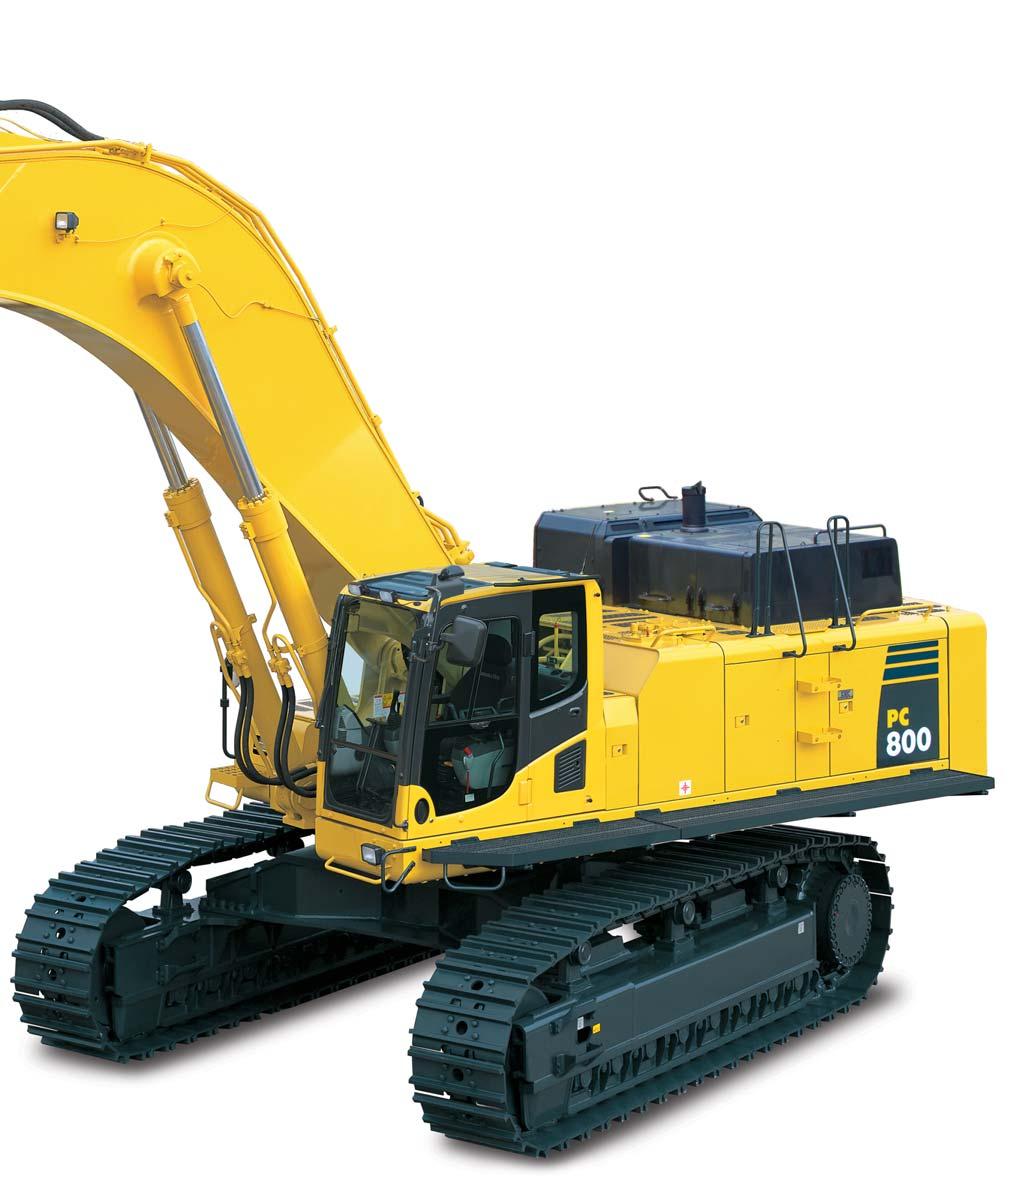 Ecology and Economy Features HYDRAULIC EXCAVATOR Low Emission Engine A powerful, turbocharged and air-to-air aftercooled Komatsu SA